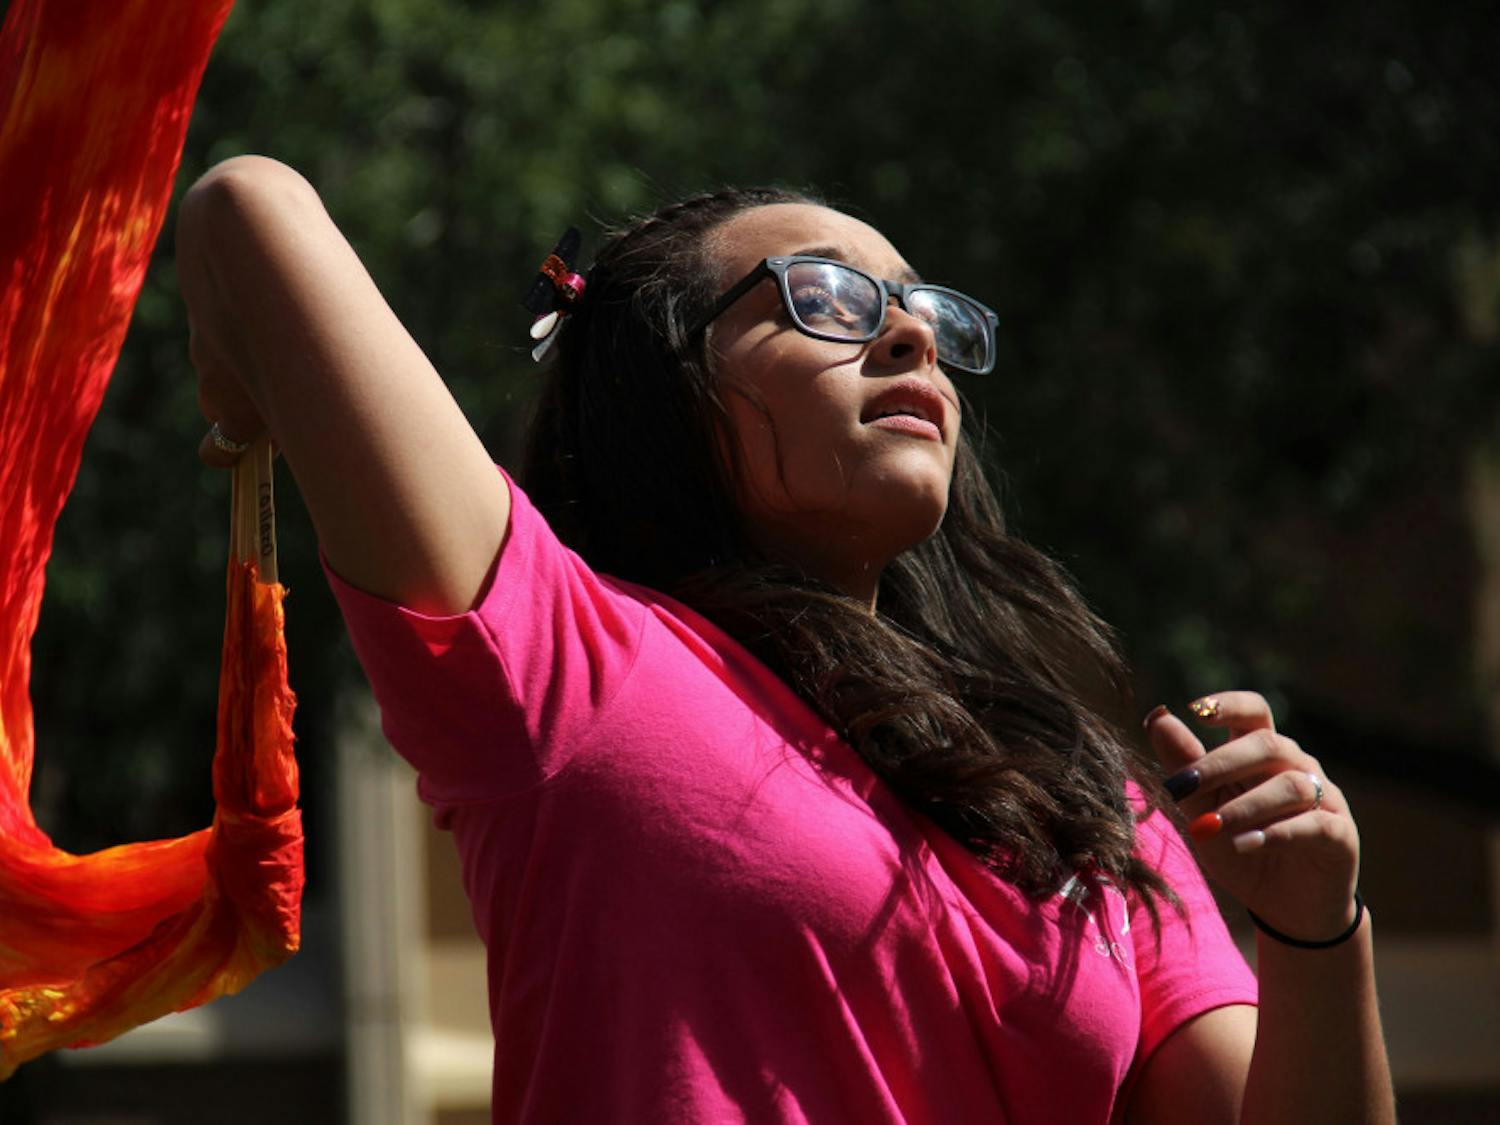 Carla Collazo, a 16-year-old from Puerto Rico, leads her veiled-fan dance group for Iglesia Casa Del Alfarero, or Potter's House Church, during the Downtown Latino Festival in Bo Diddley Plaza Saturday afternoon. 